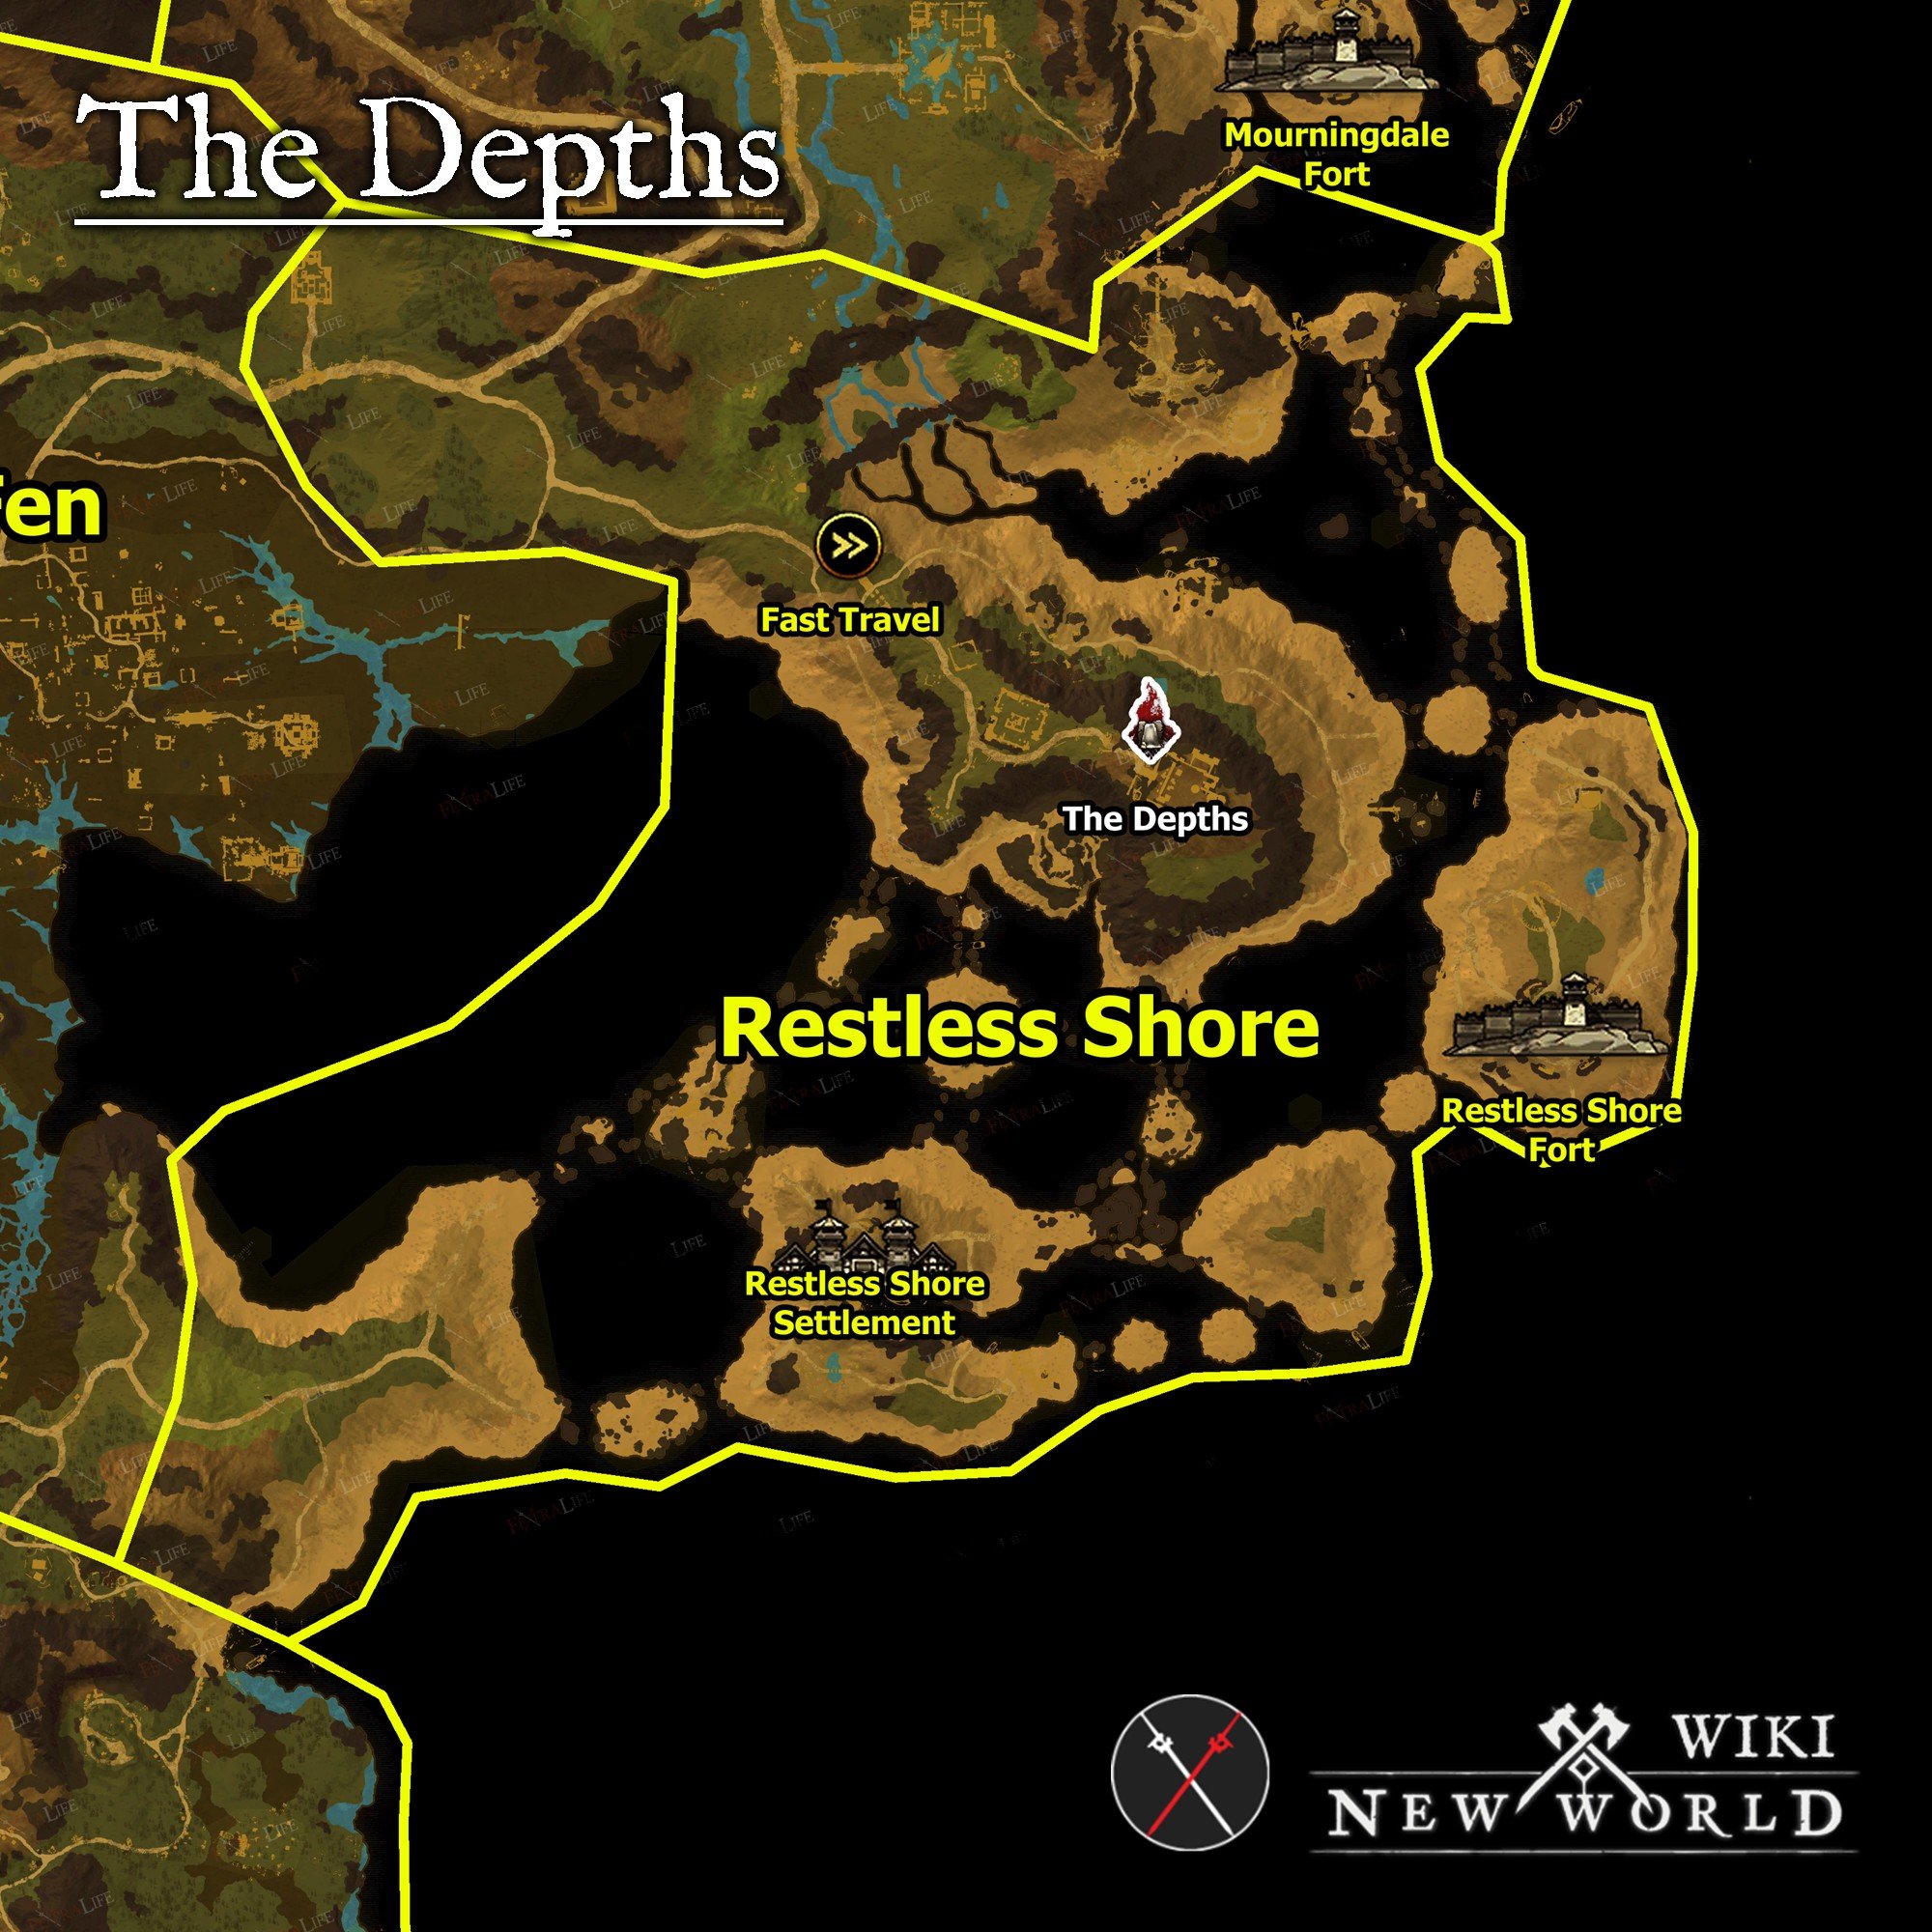 from the depths map